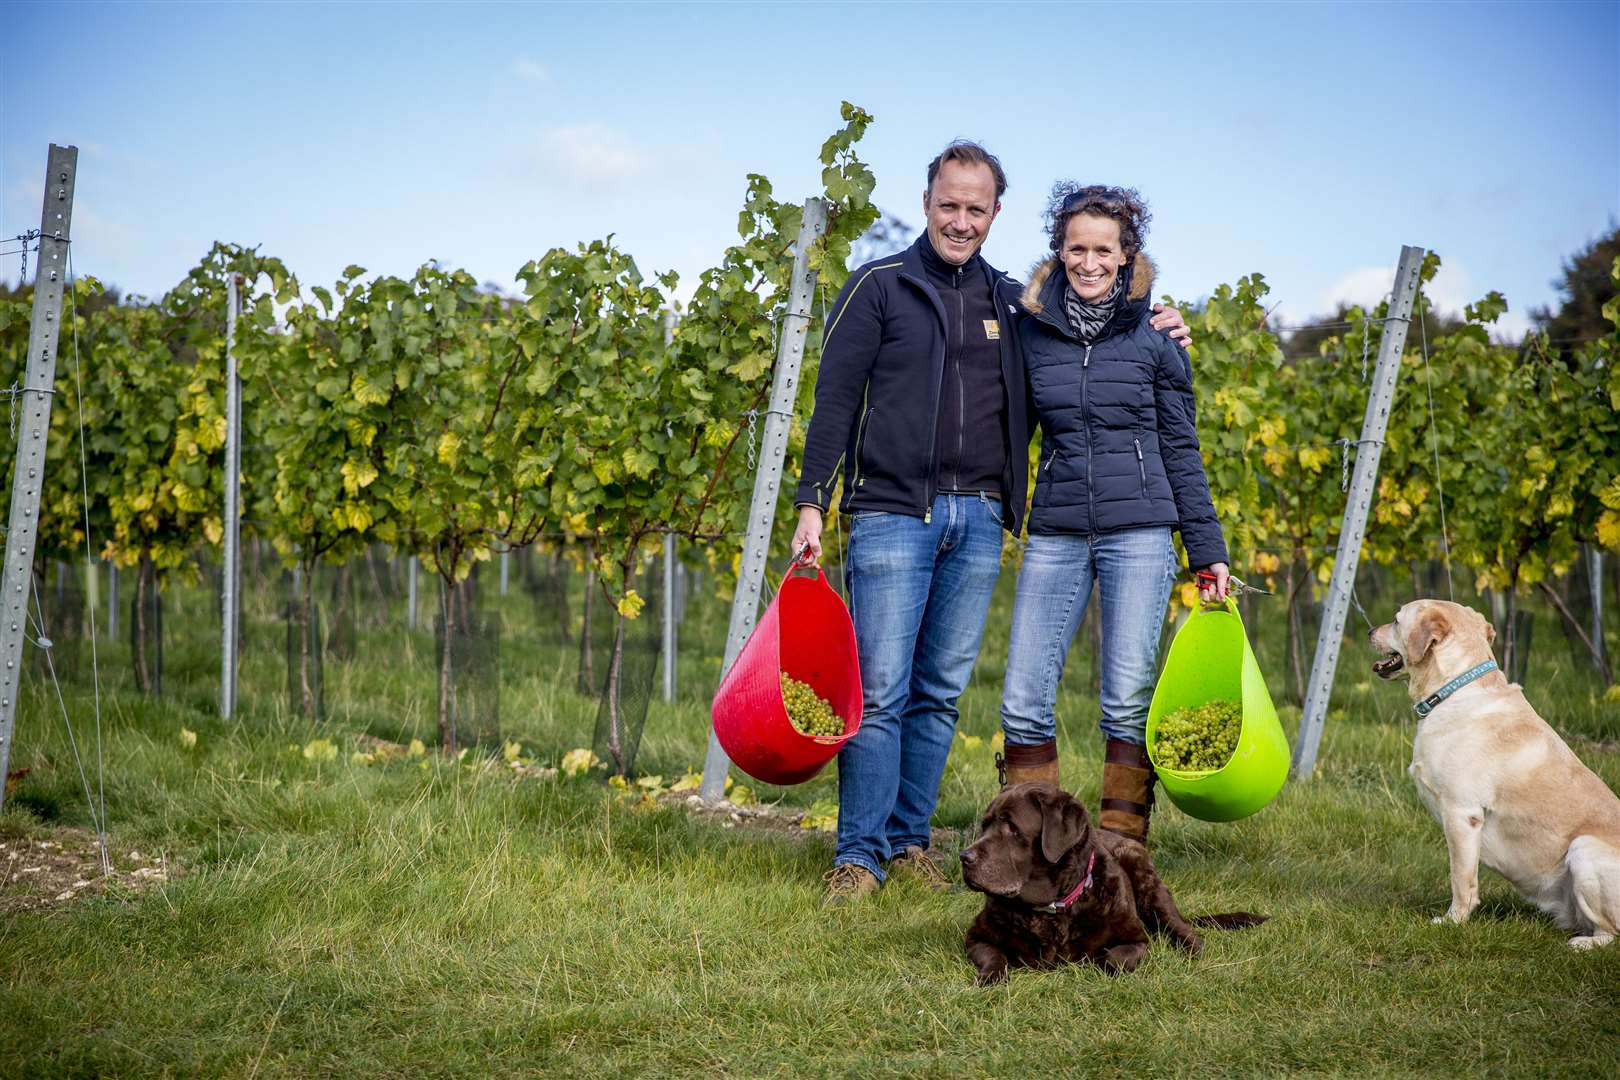 Charles and Ruth Simpson bringing in the grapes at their wine estate in Barham